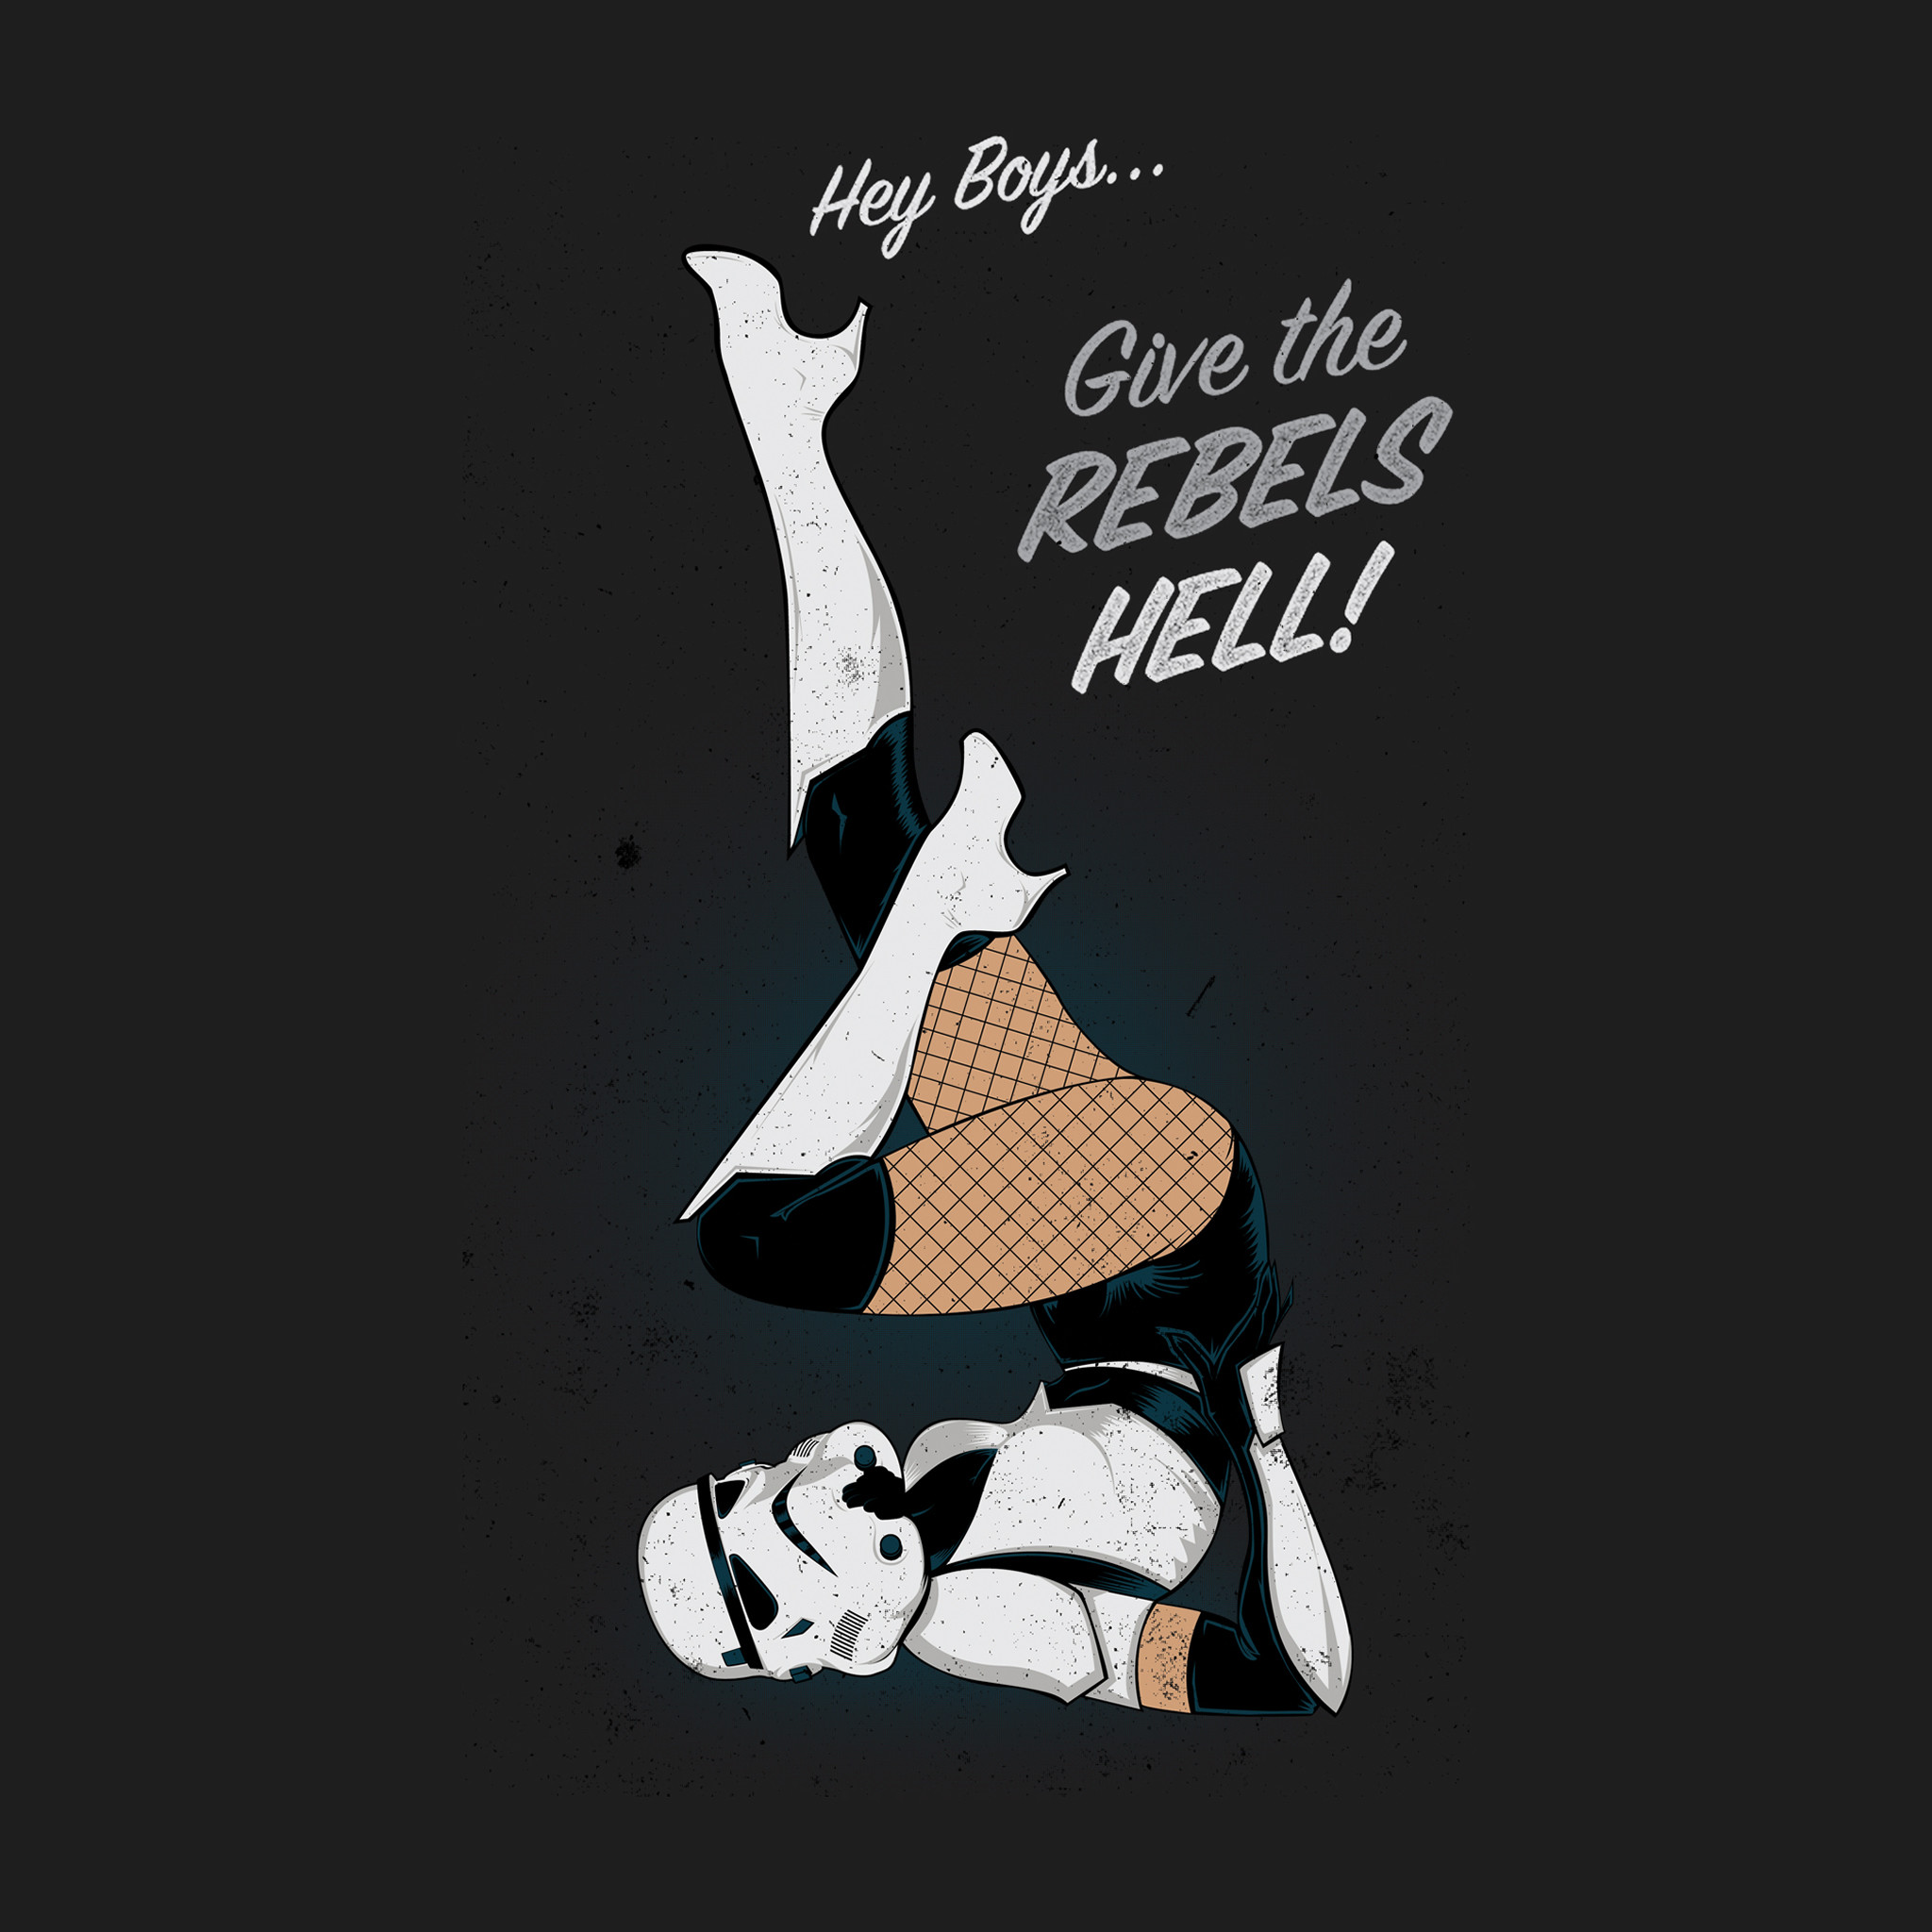 Stormtrooper Pin Up Girl Style iPad Air Wallpaper Download | iPhone .